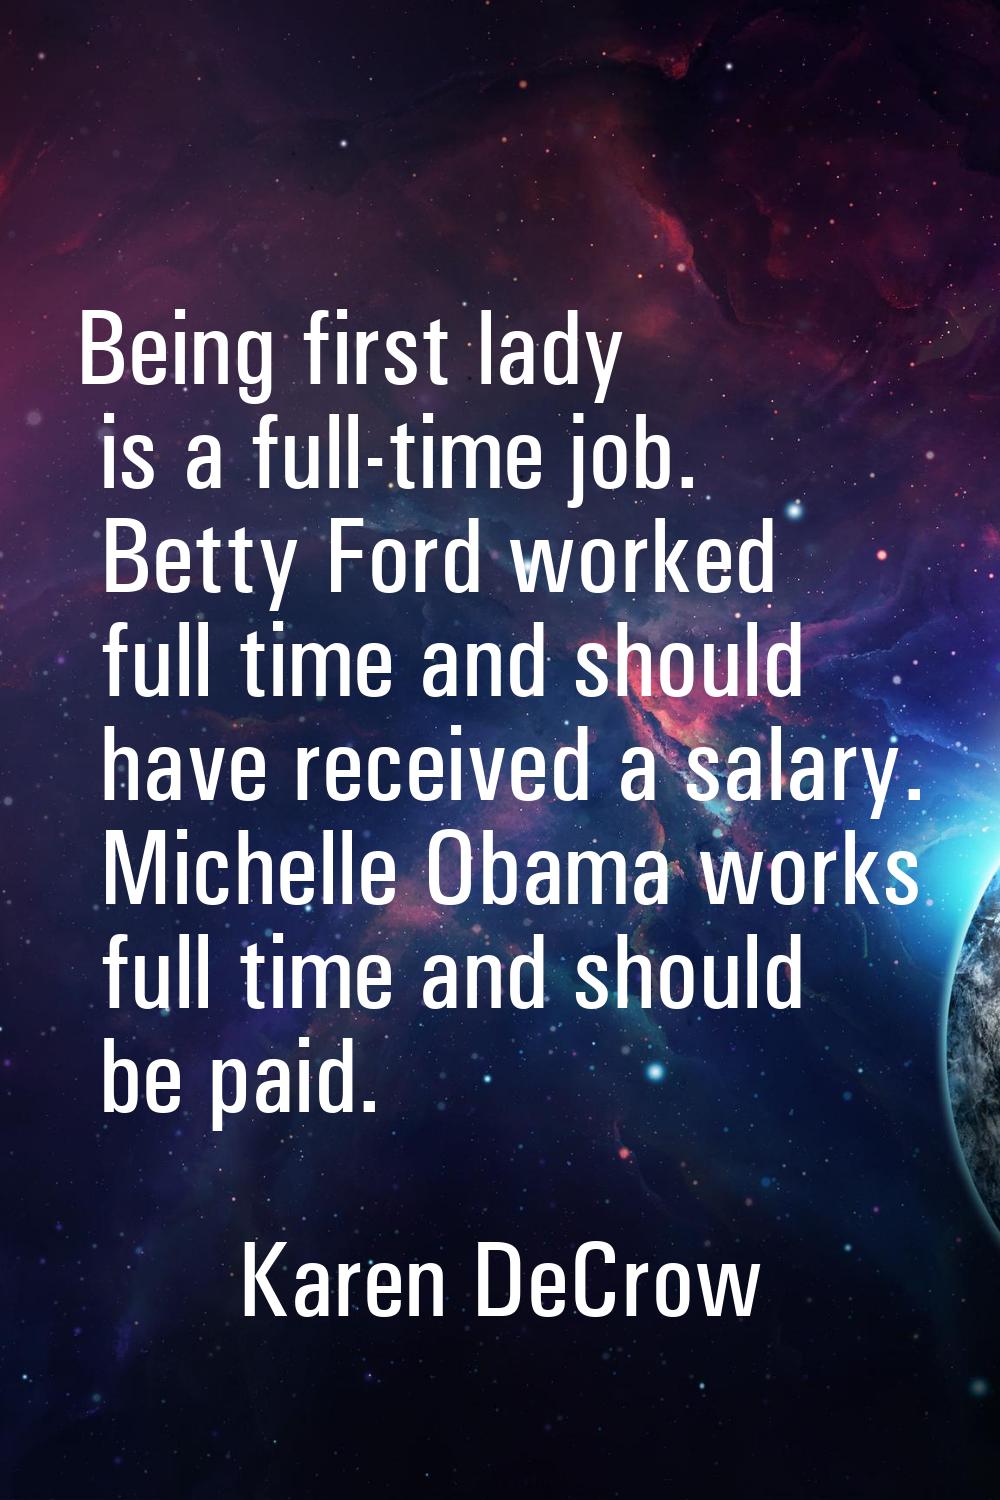 Being first lady is a full-time job. Betty Ford worked full time and should have received a salary.